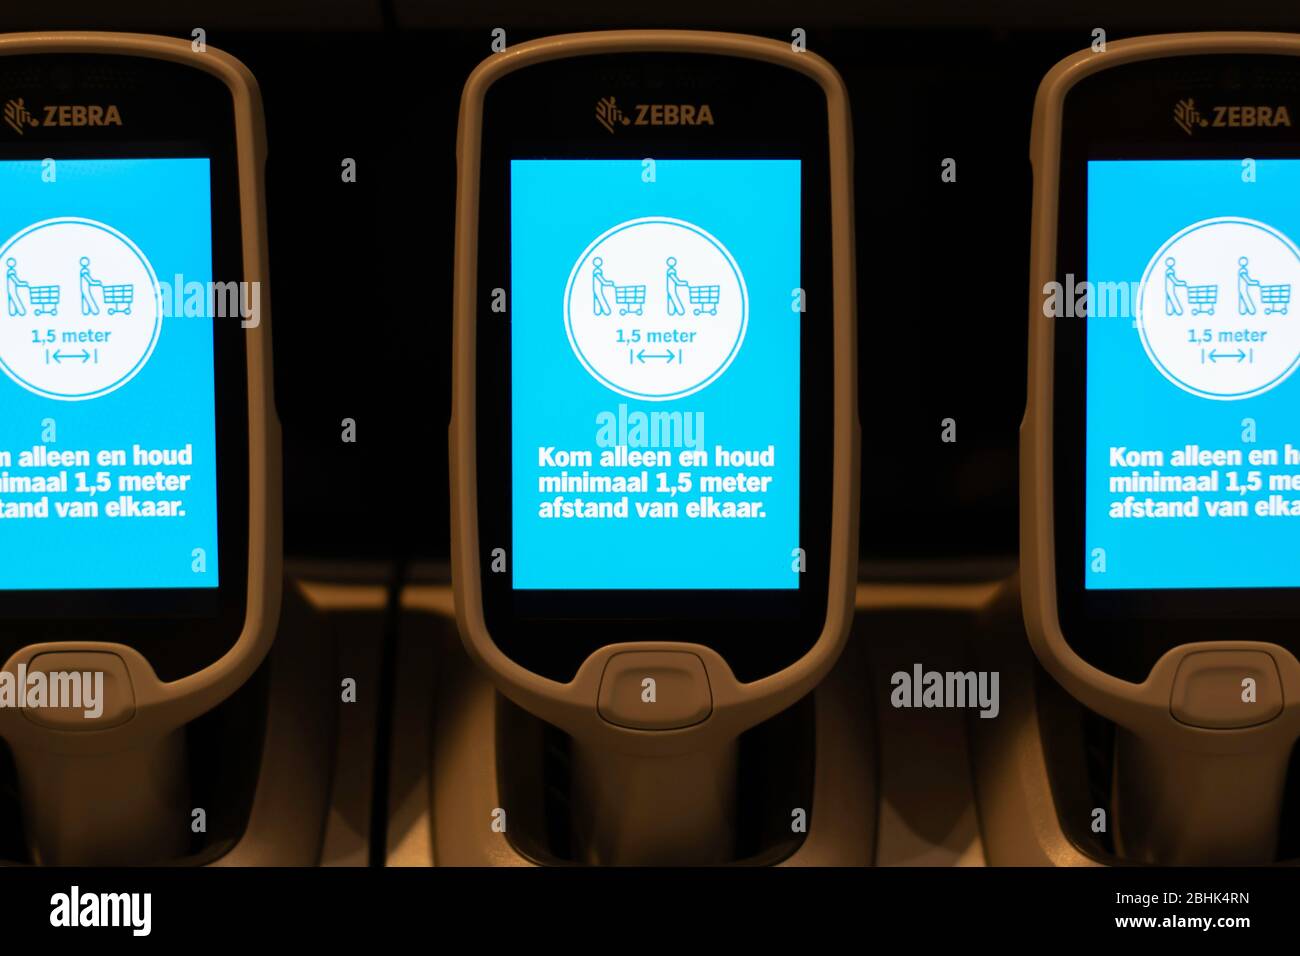 Self-scanners or hand-held scanners with touchscreen in a supermarket with dutch text reminding people to keep distance of 1,5 meters Stock Photo